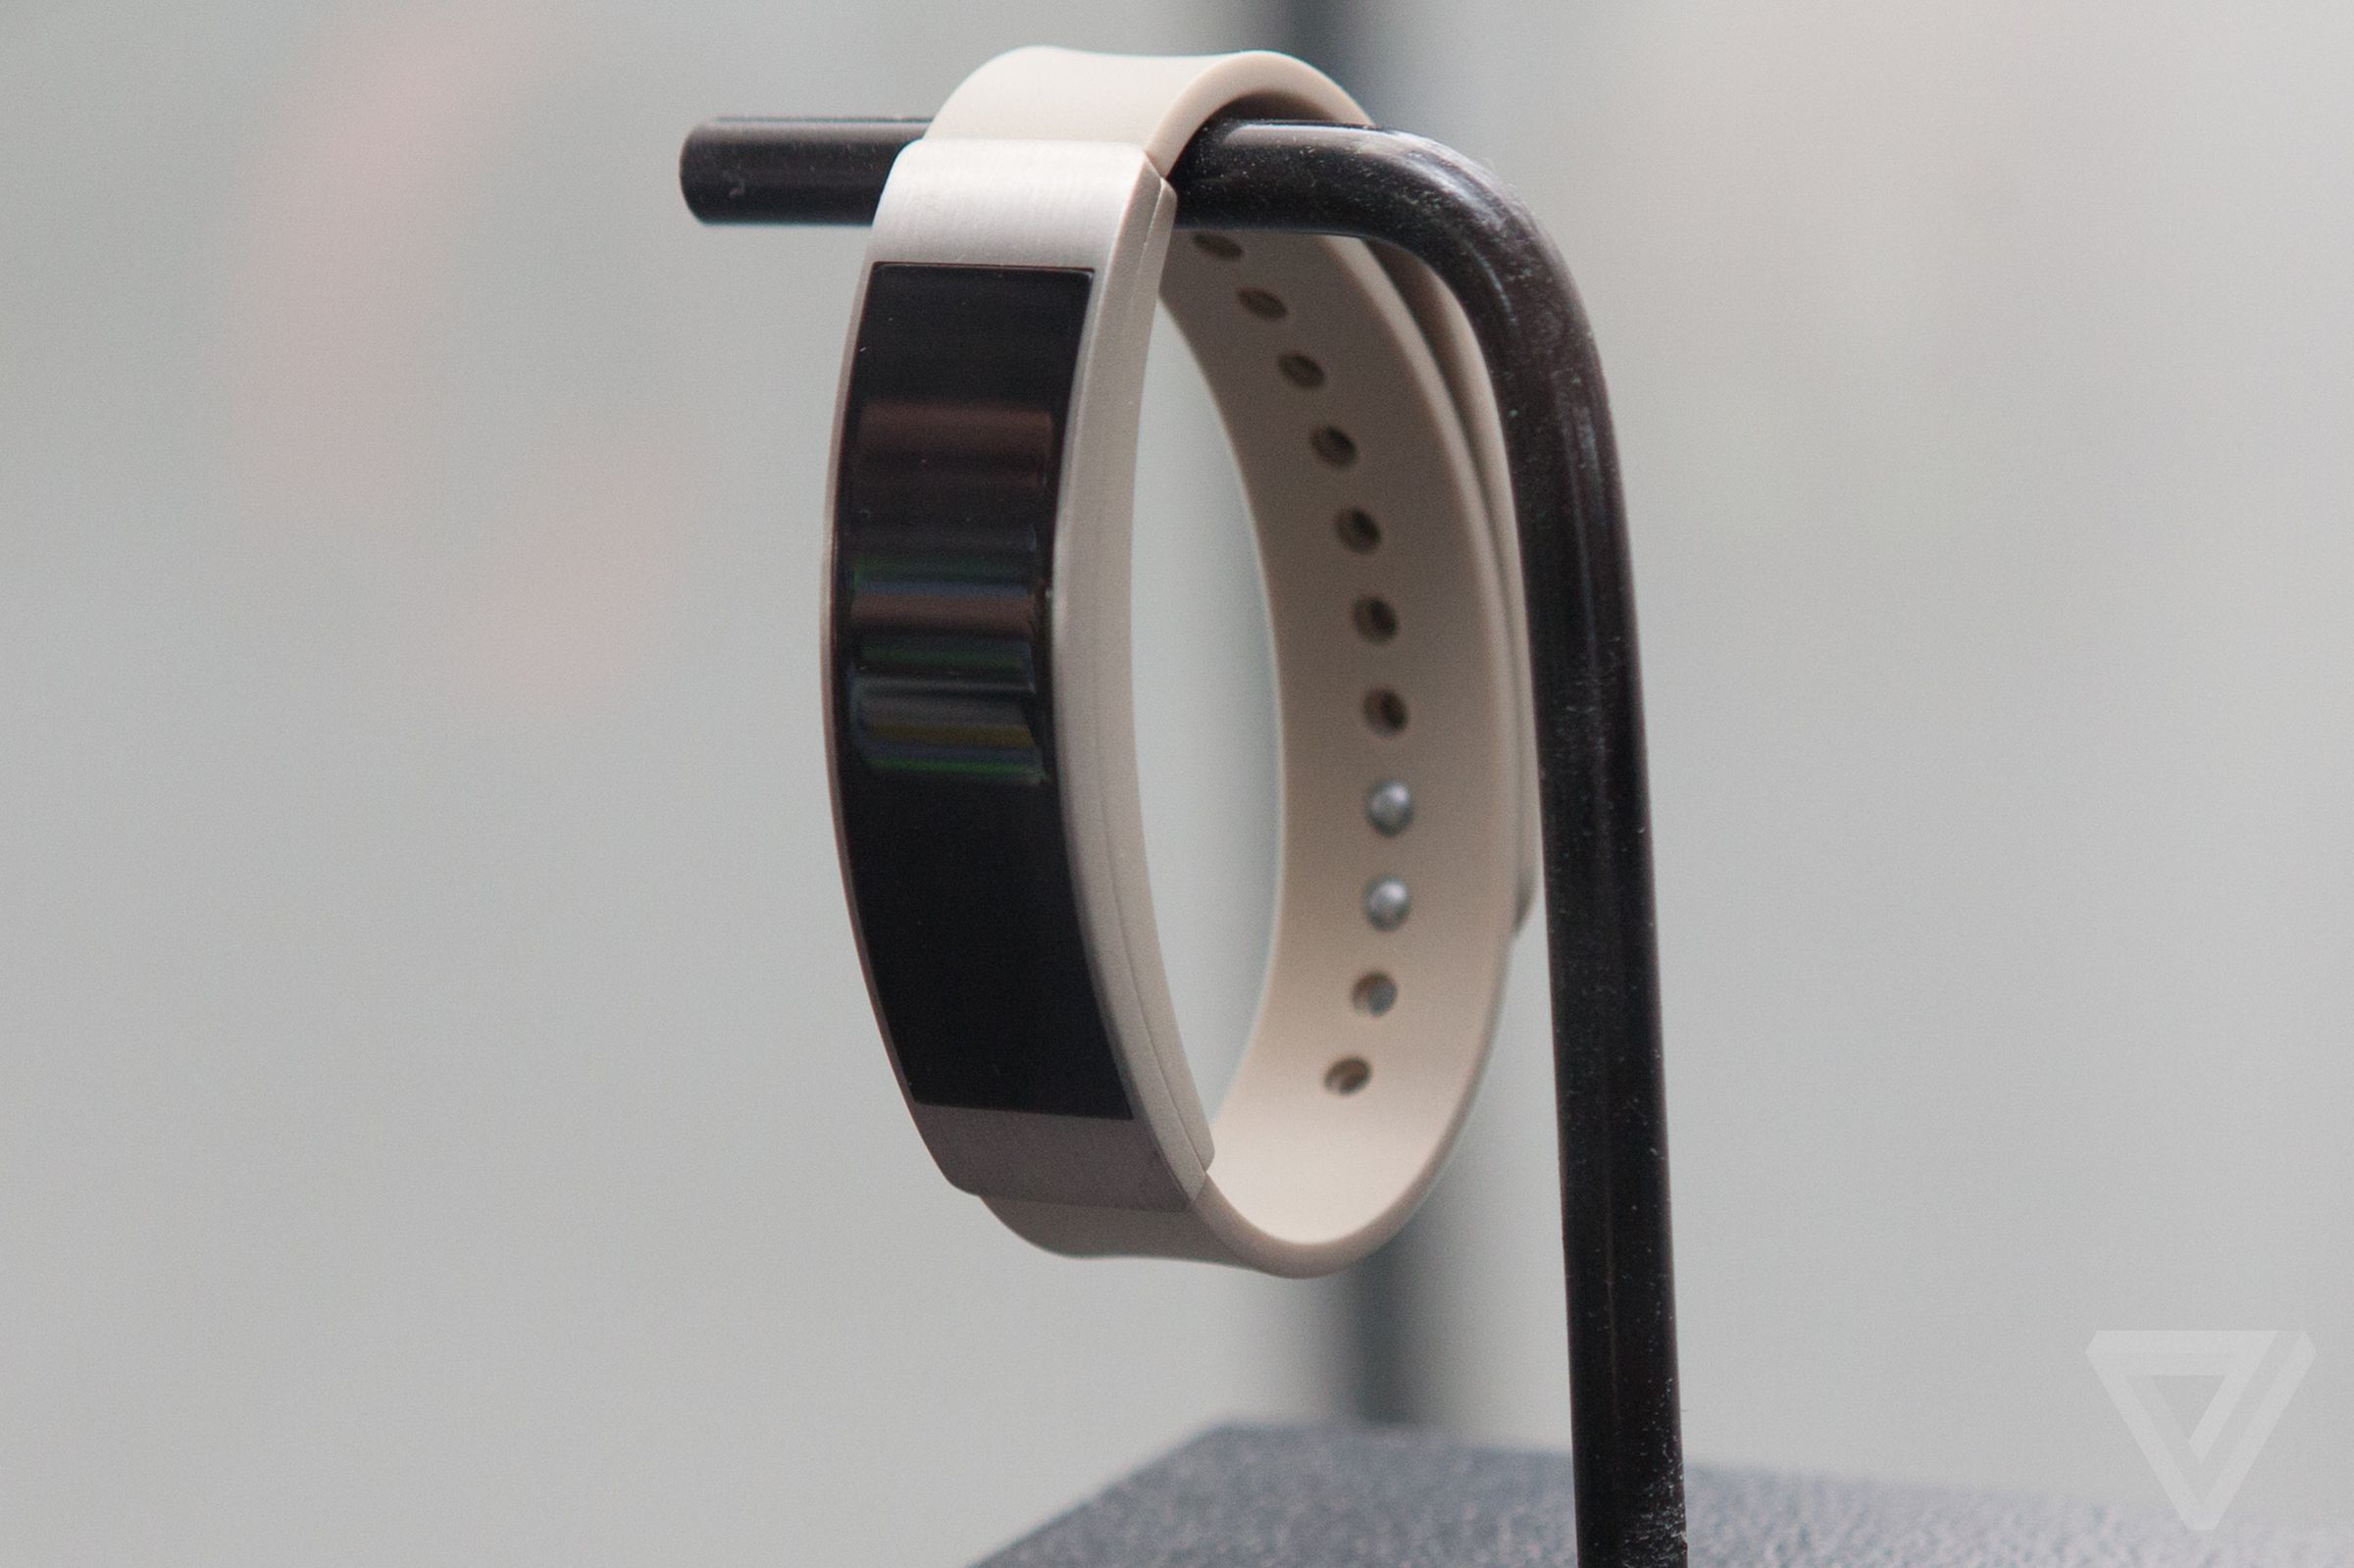 Acer 2015 wearables hands-on photos